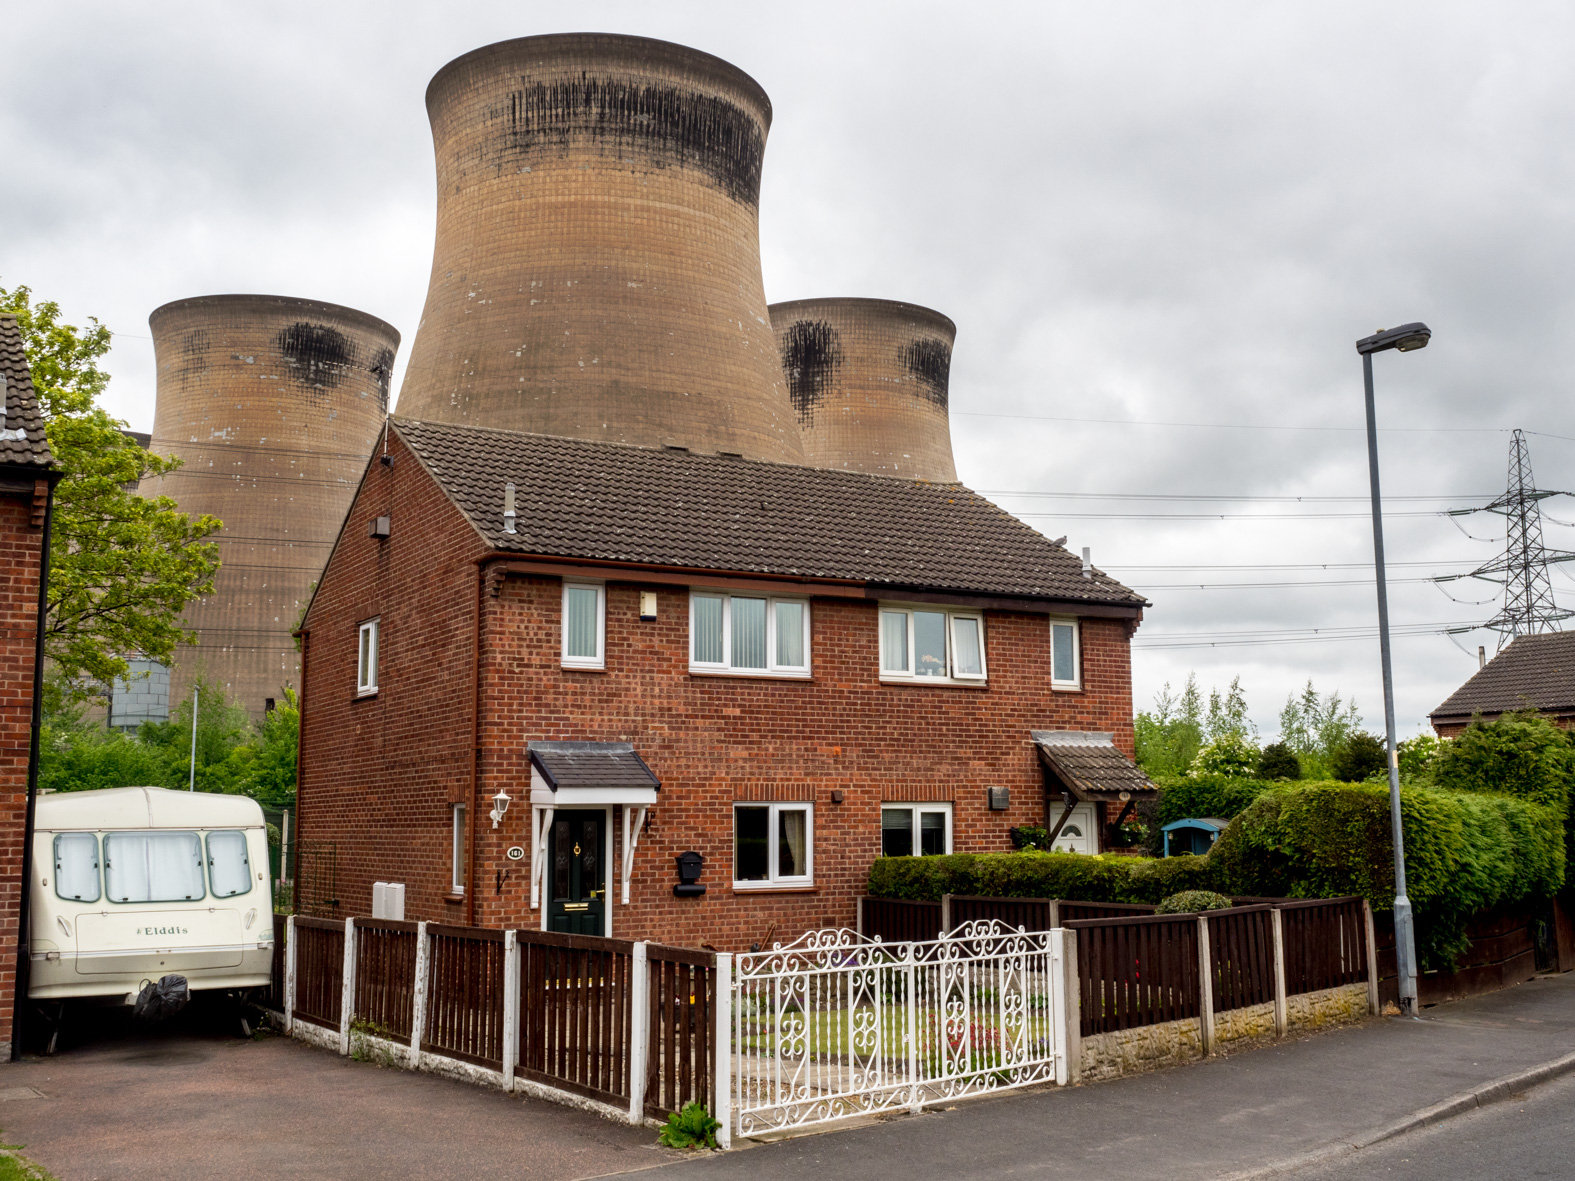 Houses situated in close proximity to the cooling towers at Ferrybridge Power Station. Knottingley, West Yorkshire.